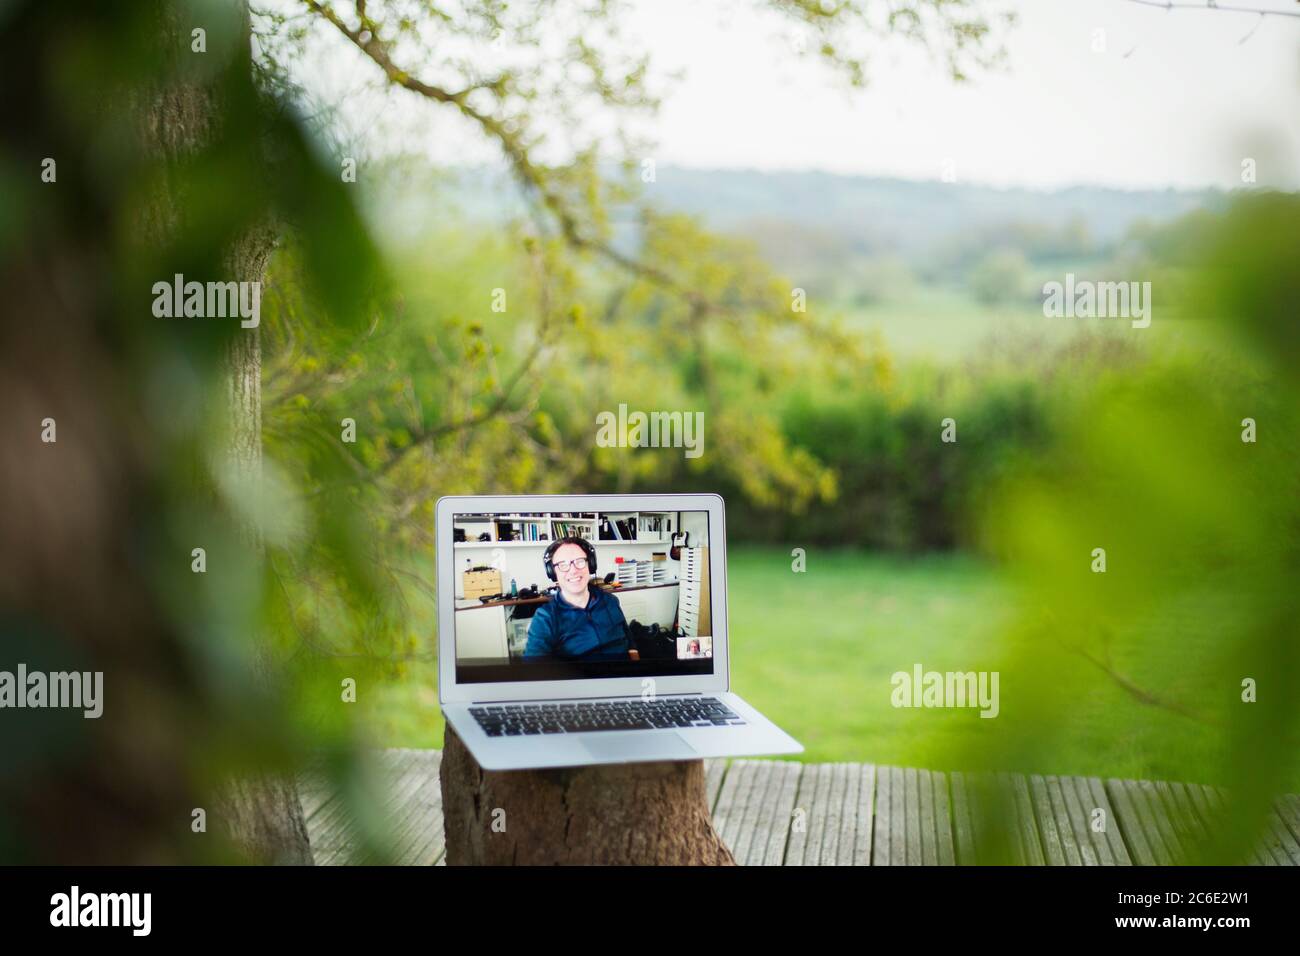 Colleagues video chatting on laptop screen on balcony Stock Photo